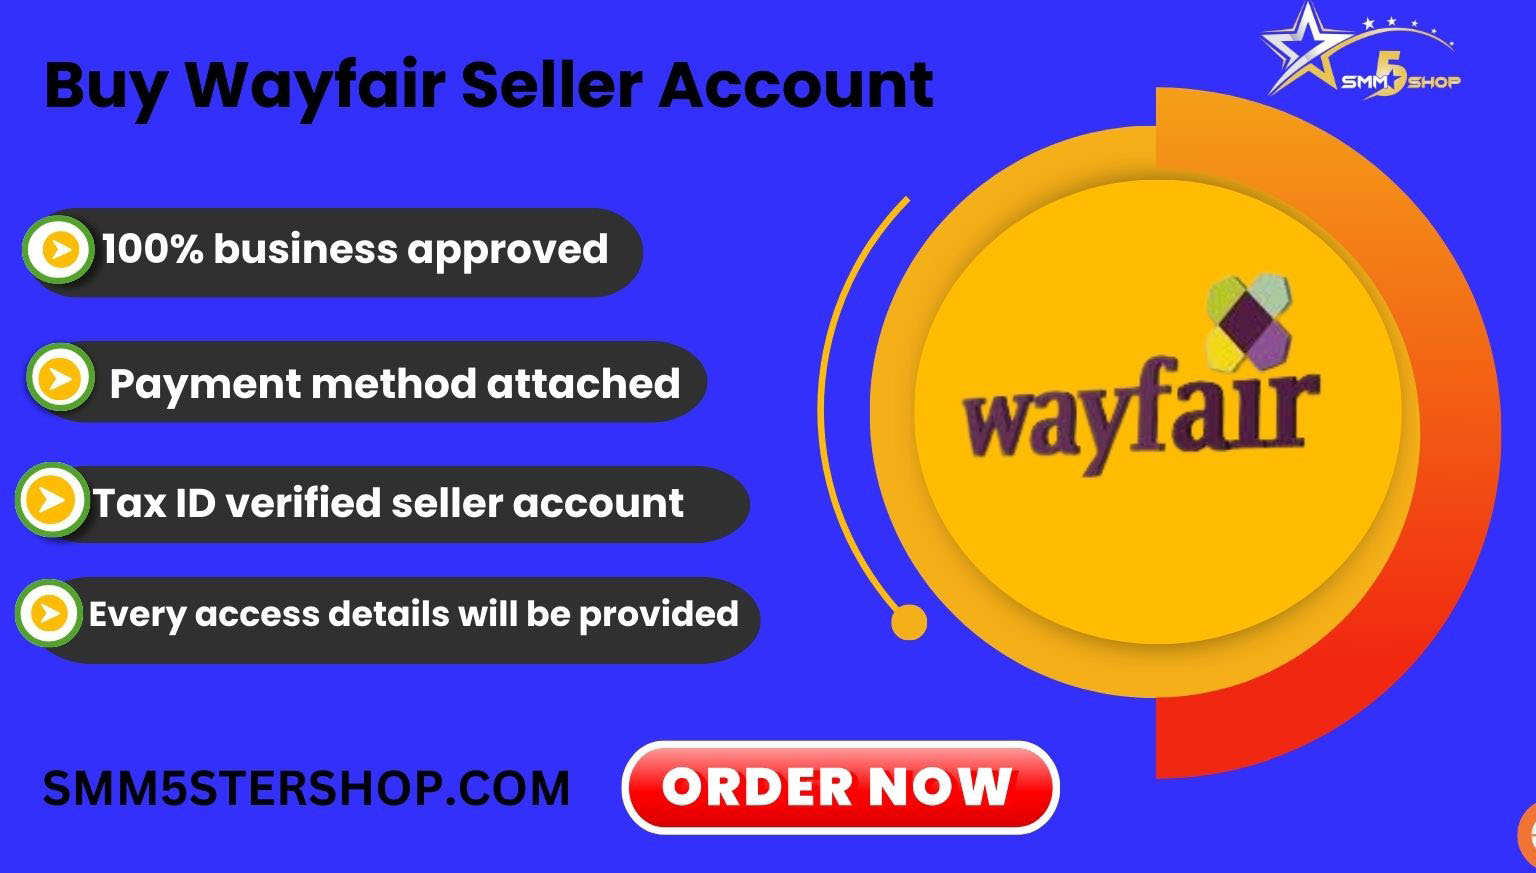 Buy Wayfair Seller Account at smm5starshop.com at best price. Our account are fully safe and verified with email, address, LLC, EIN, TIN and billing paper.